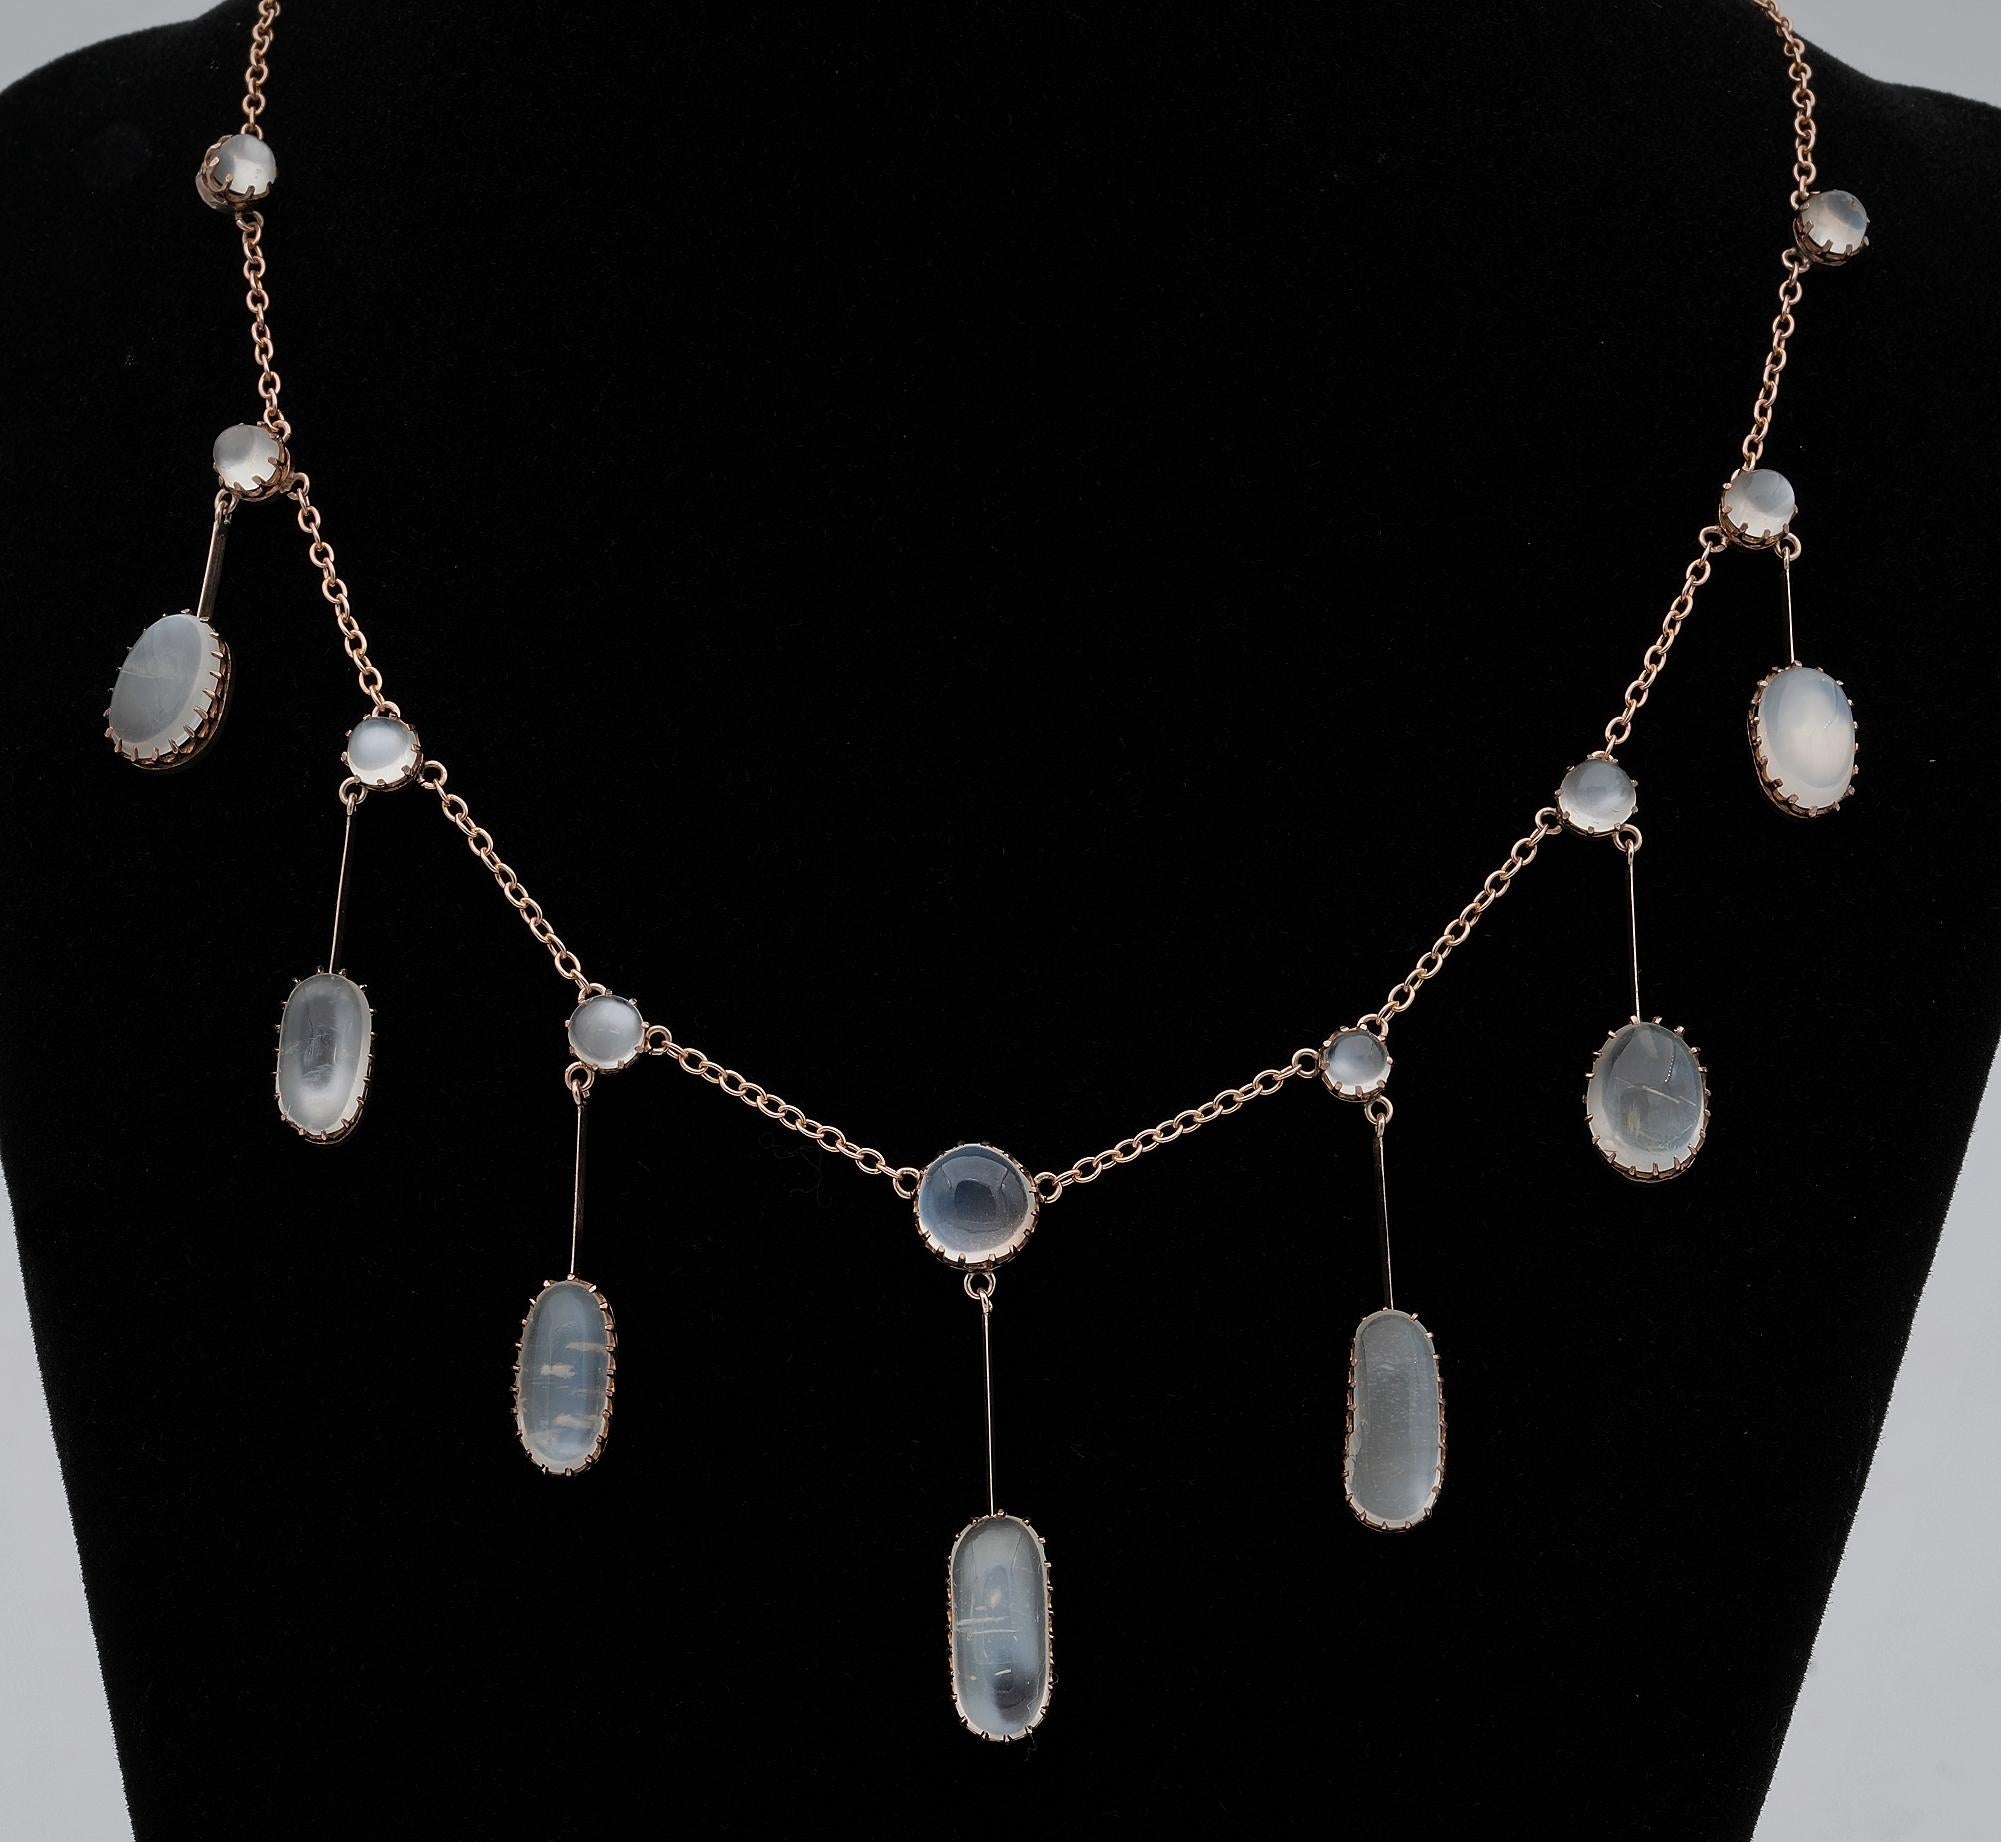 Victorian Must Have

This beautiful Victorian era Moonstone necklace is the classy must have or great addition at any good collection
1890 ca – beautiful hand crafted an mounted in 18 Kt yellow gold – tested
Lovely composition of various cabochon